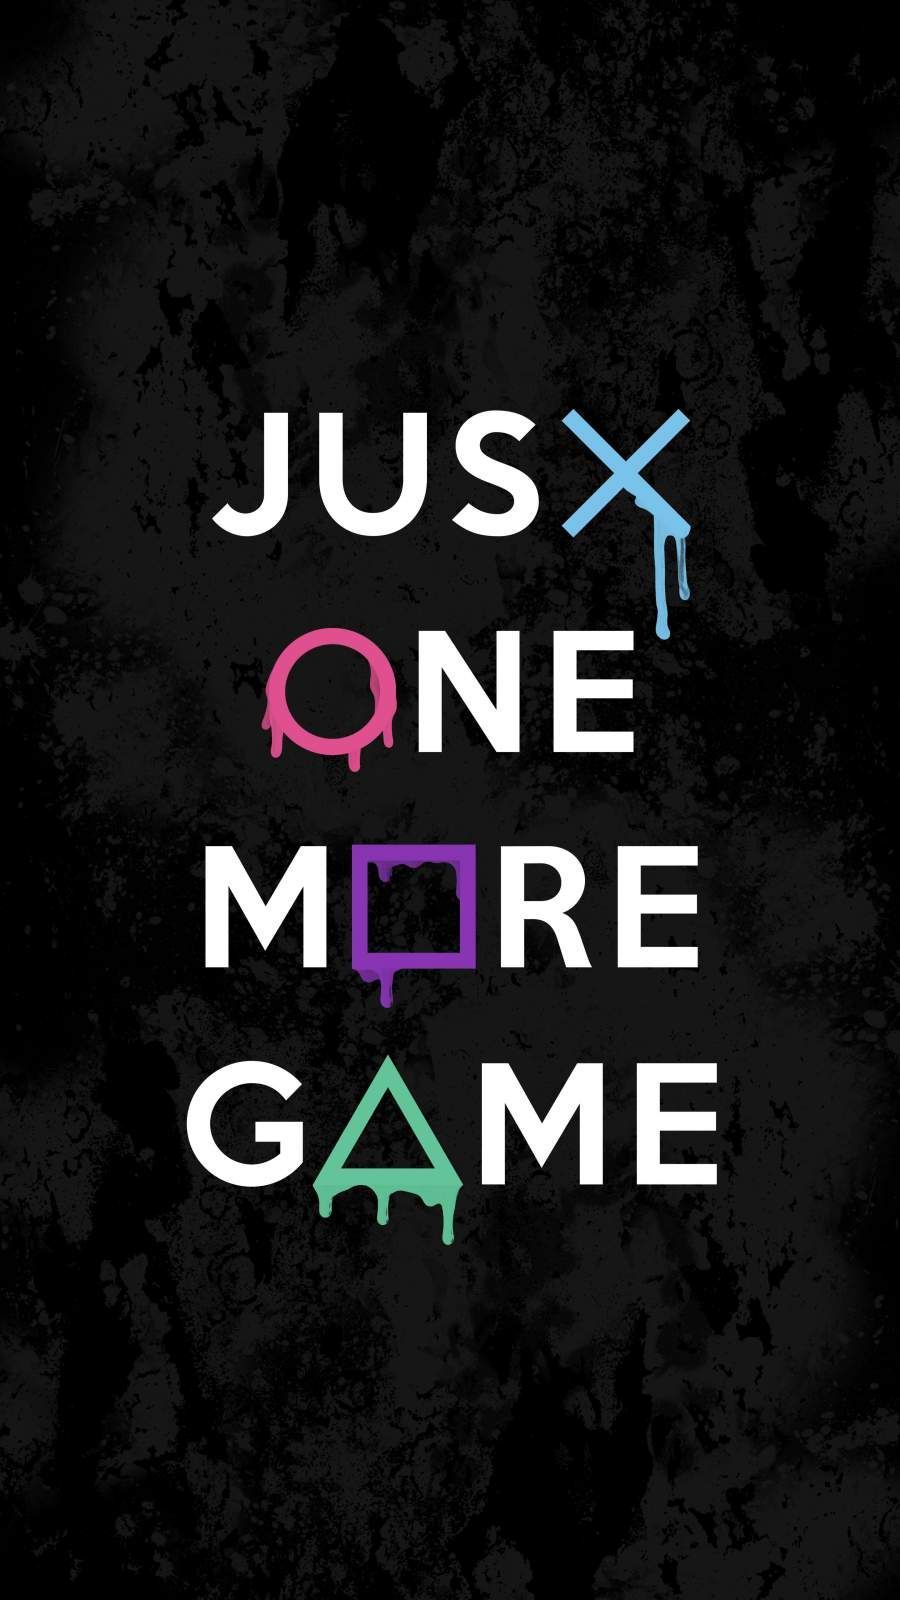 Just One More Game iPhone Wallpaper. Game wallpaper iphone, Gaming wallpaper, iPhone games